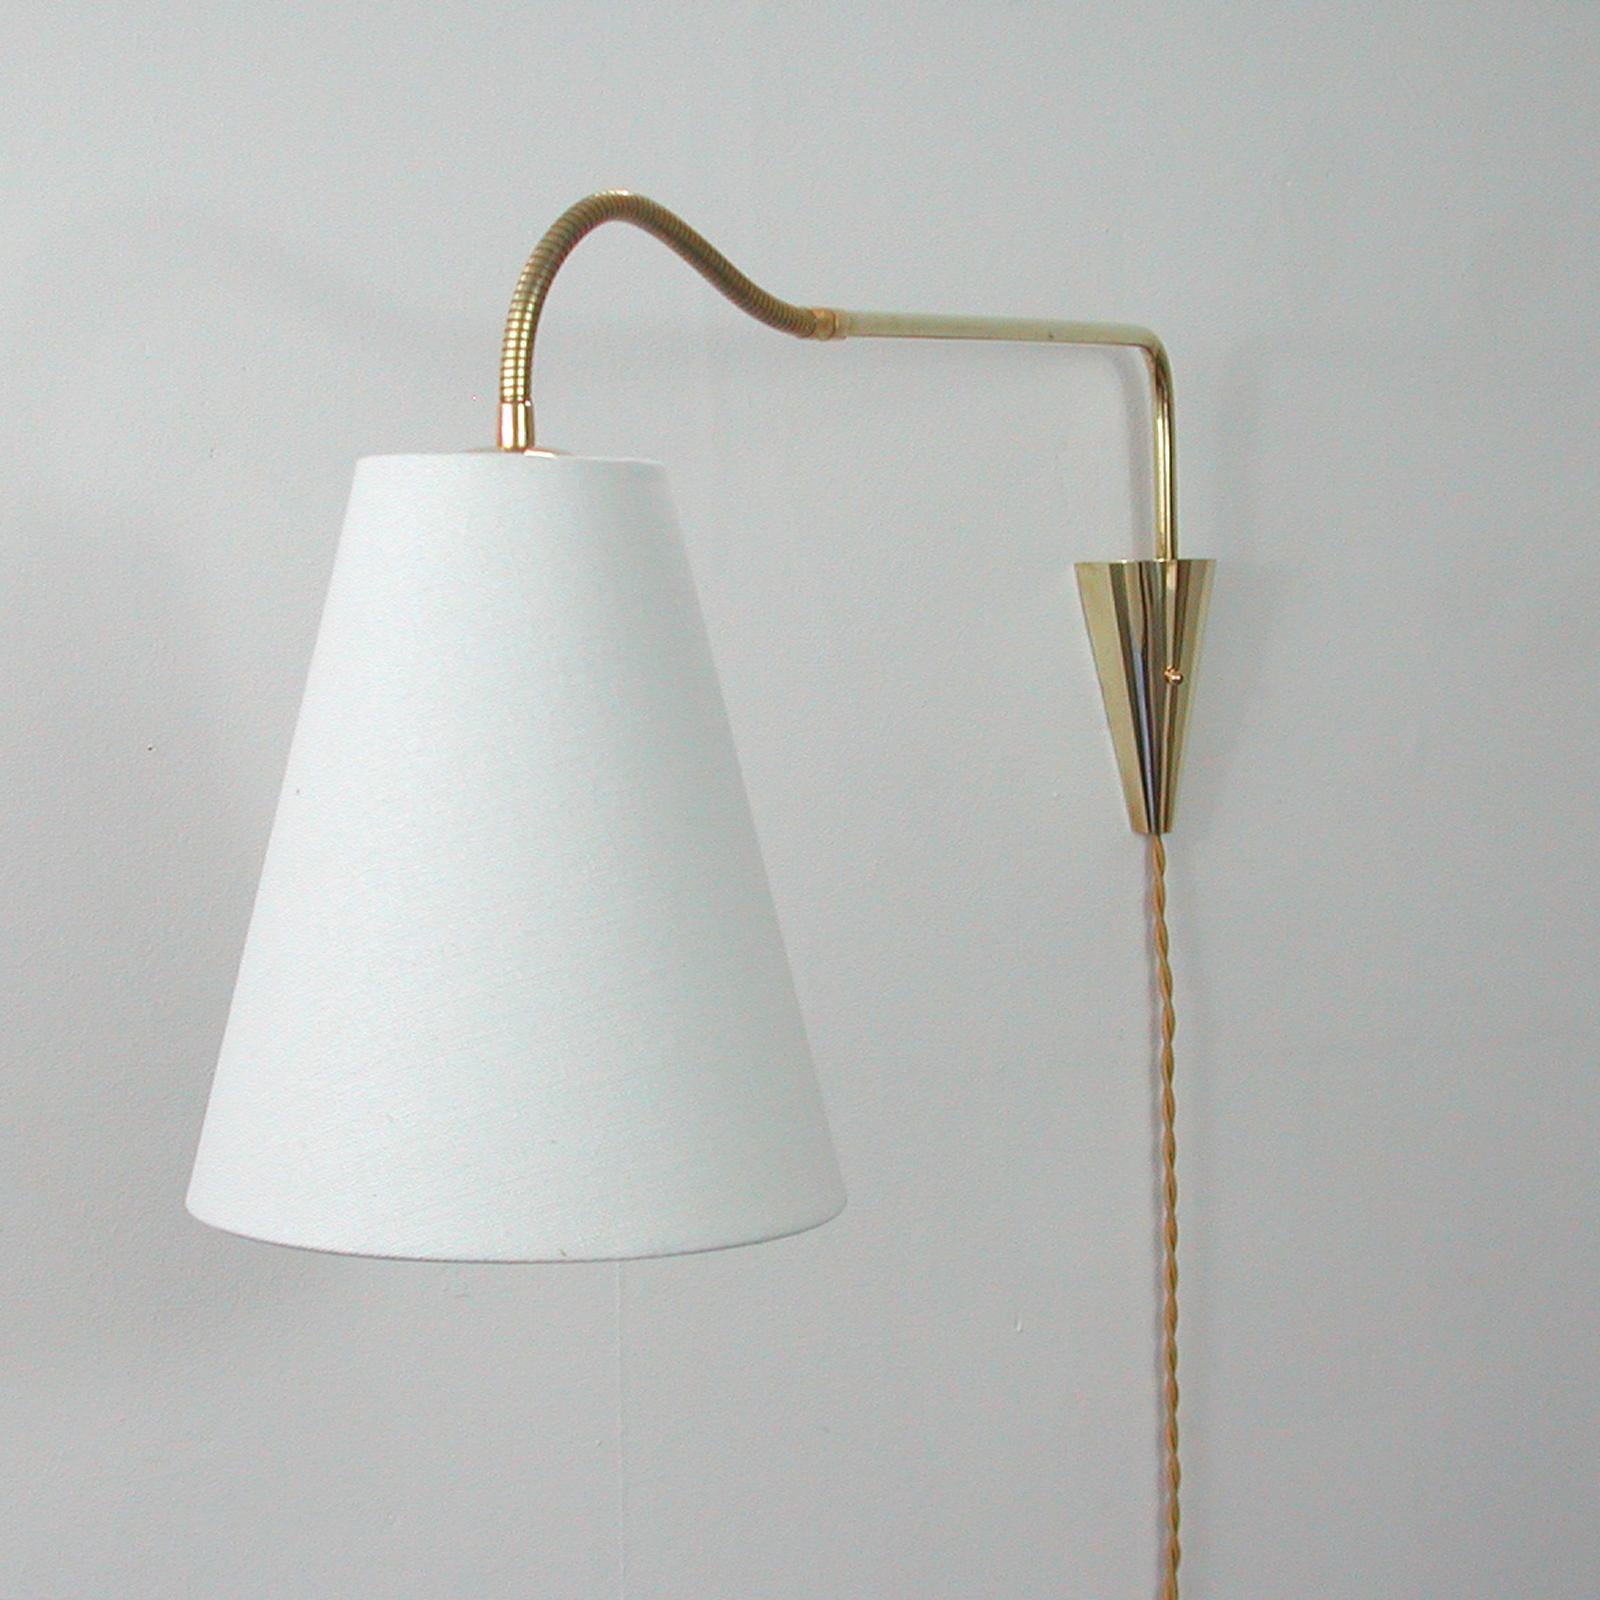 This unusual articulating and adjustable wall light was designed and manufactured in Sweden in the 1950s. The light features brass hardware and a new off-white fabric (linen) lampshade. It requires one E27 bulb. Wired with new silk cord for use in